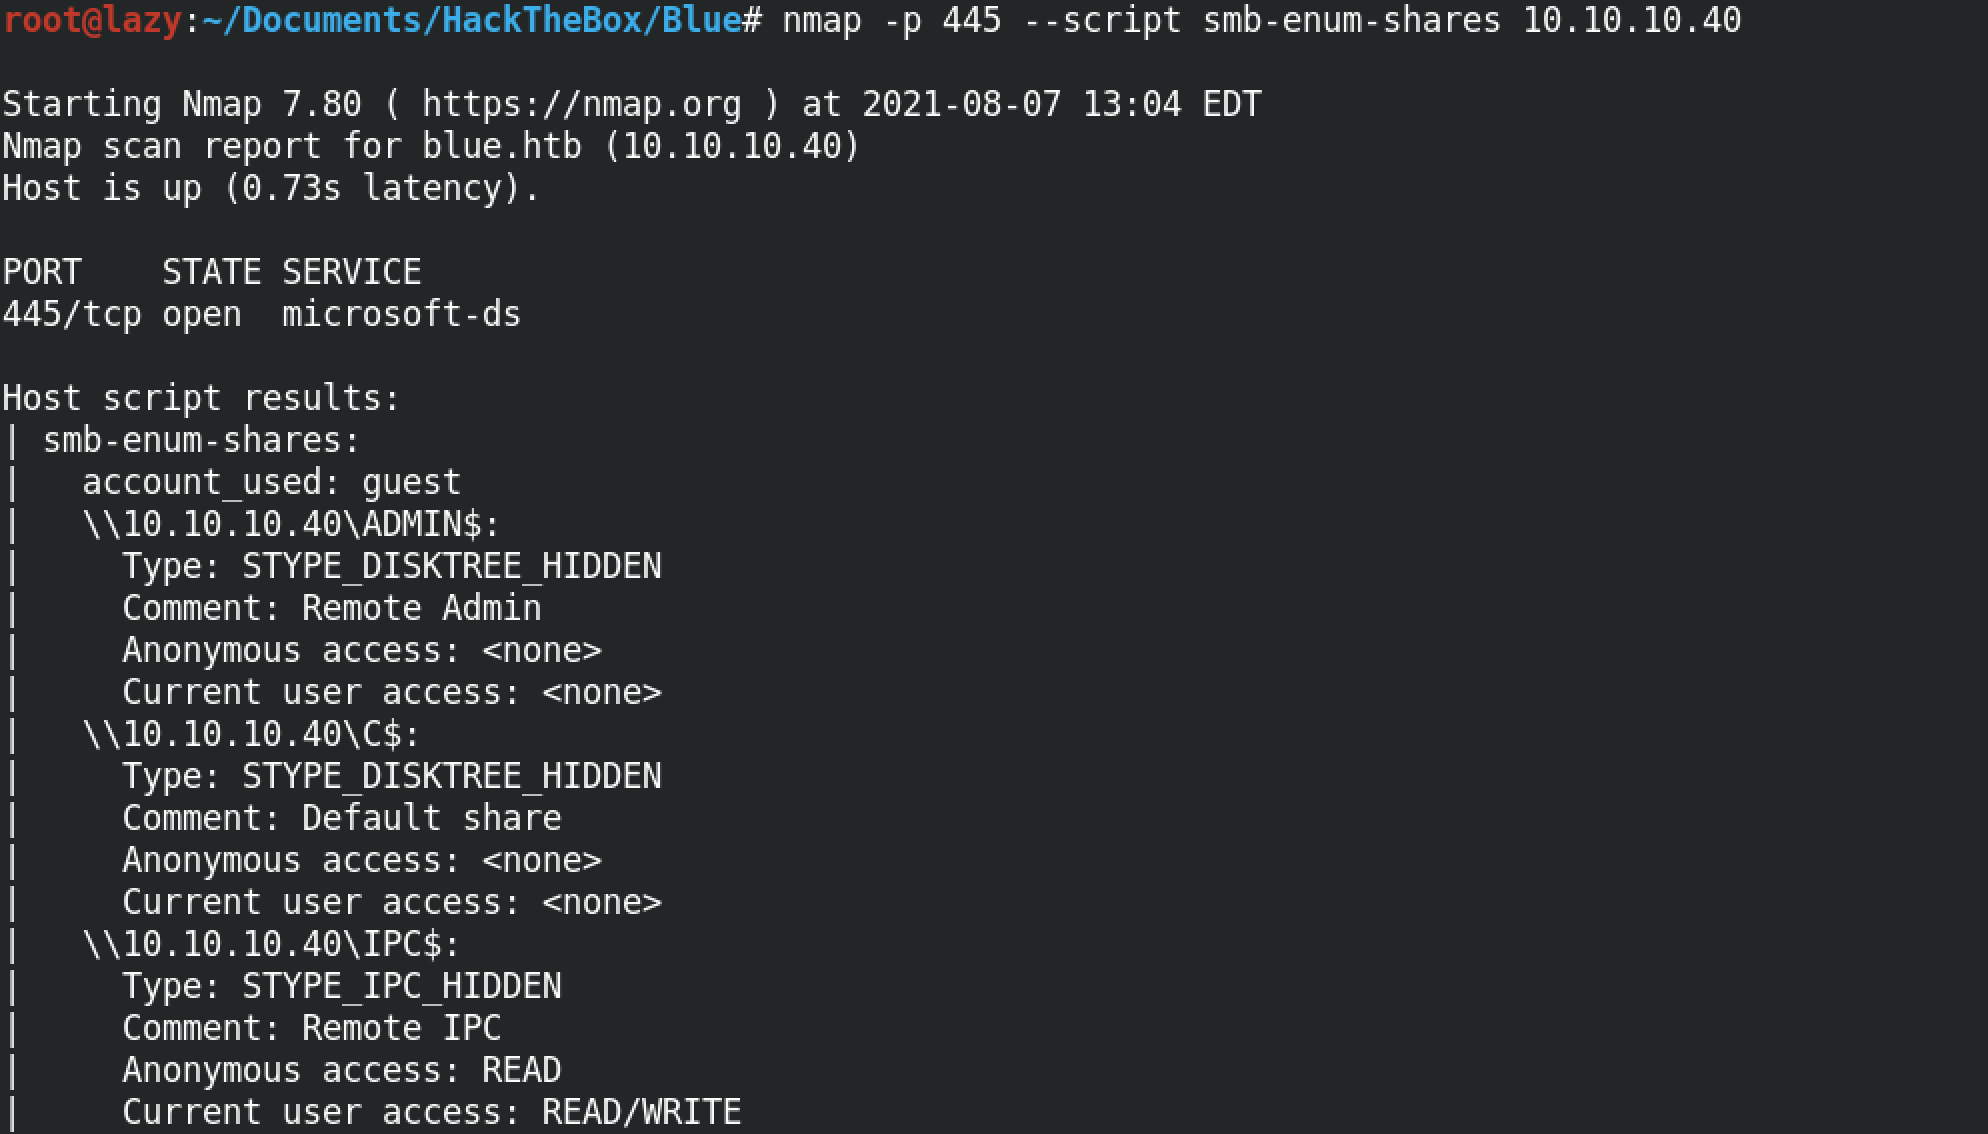 Nmap scan to enumerate SMB shares.